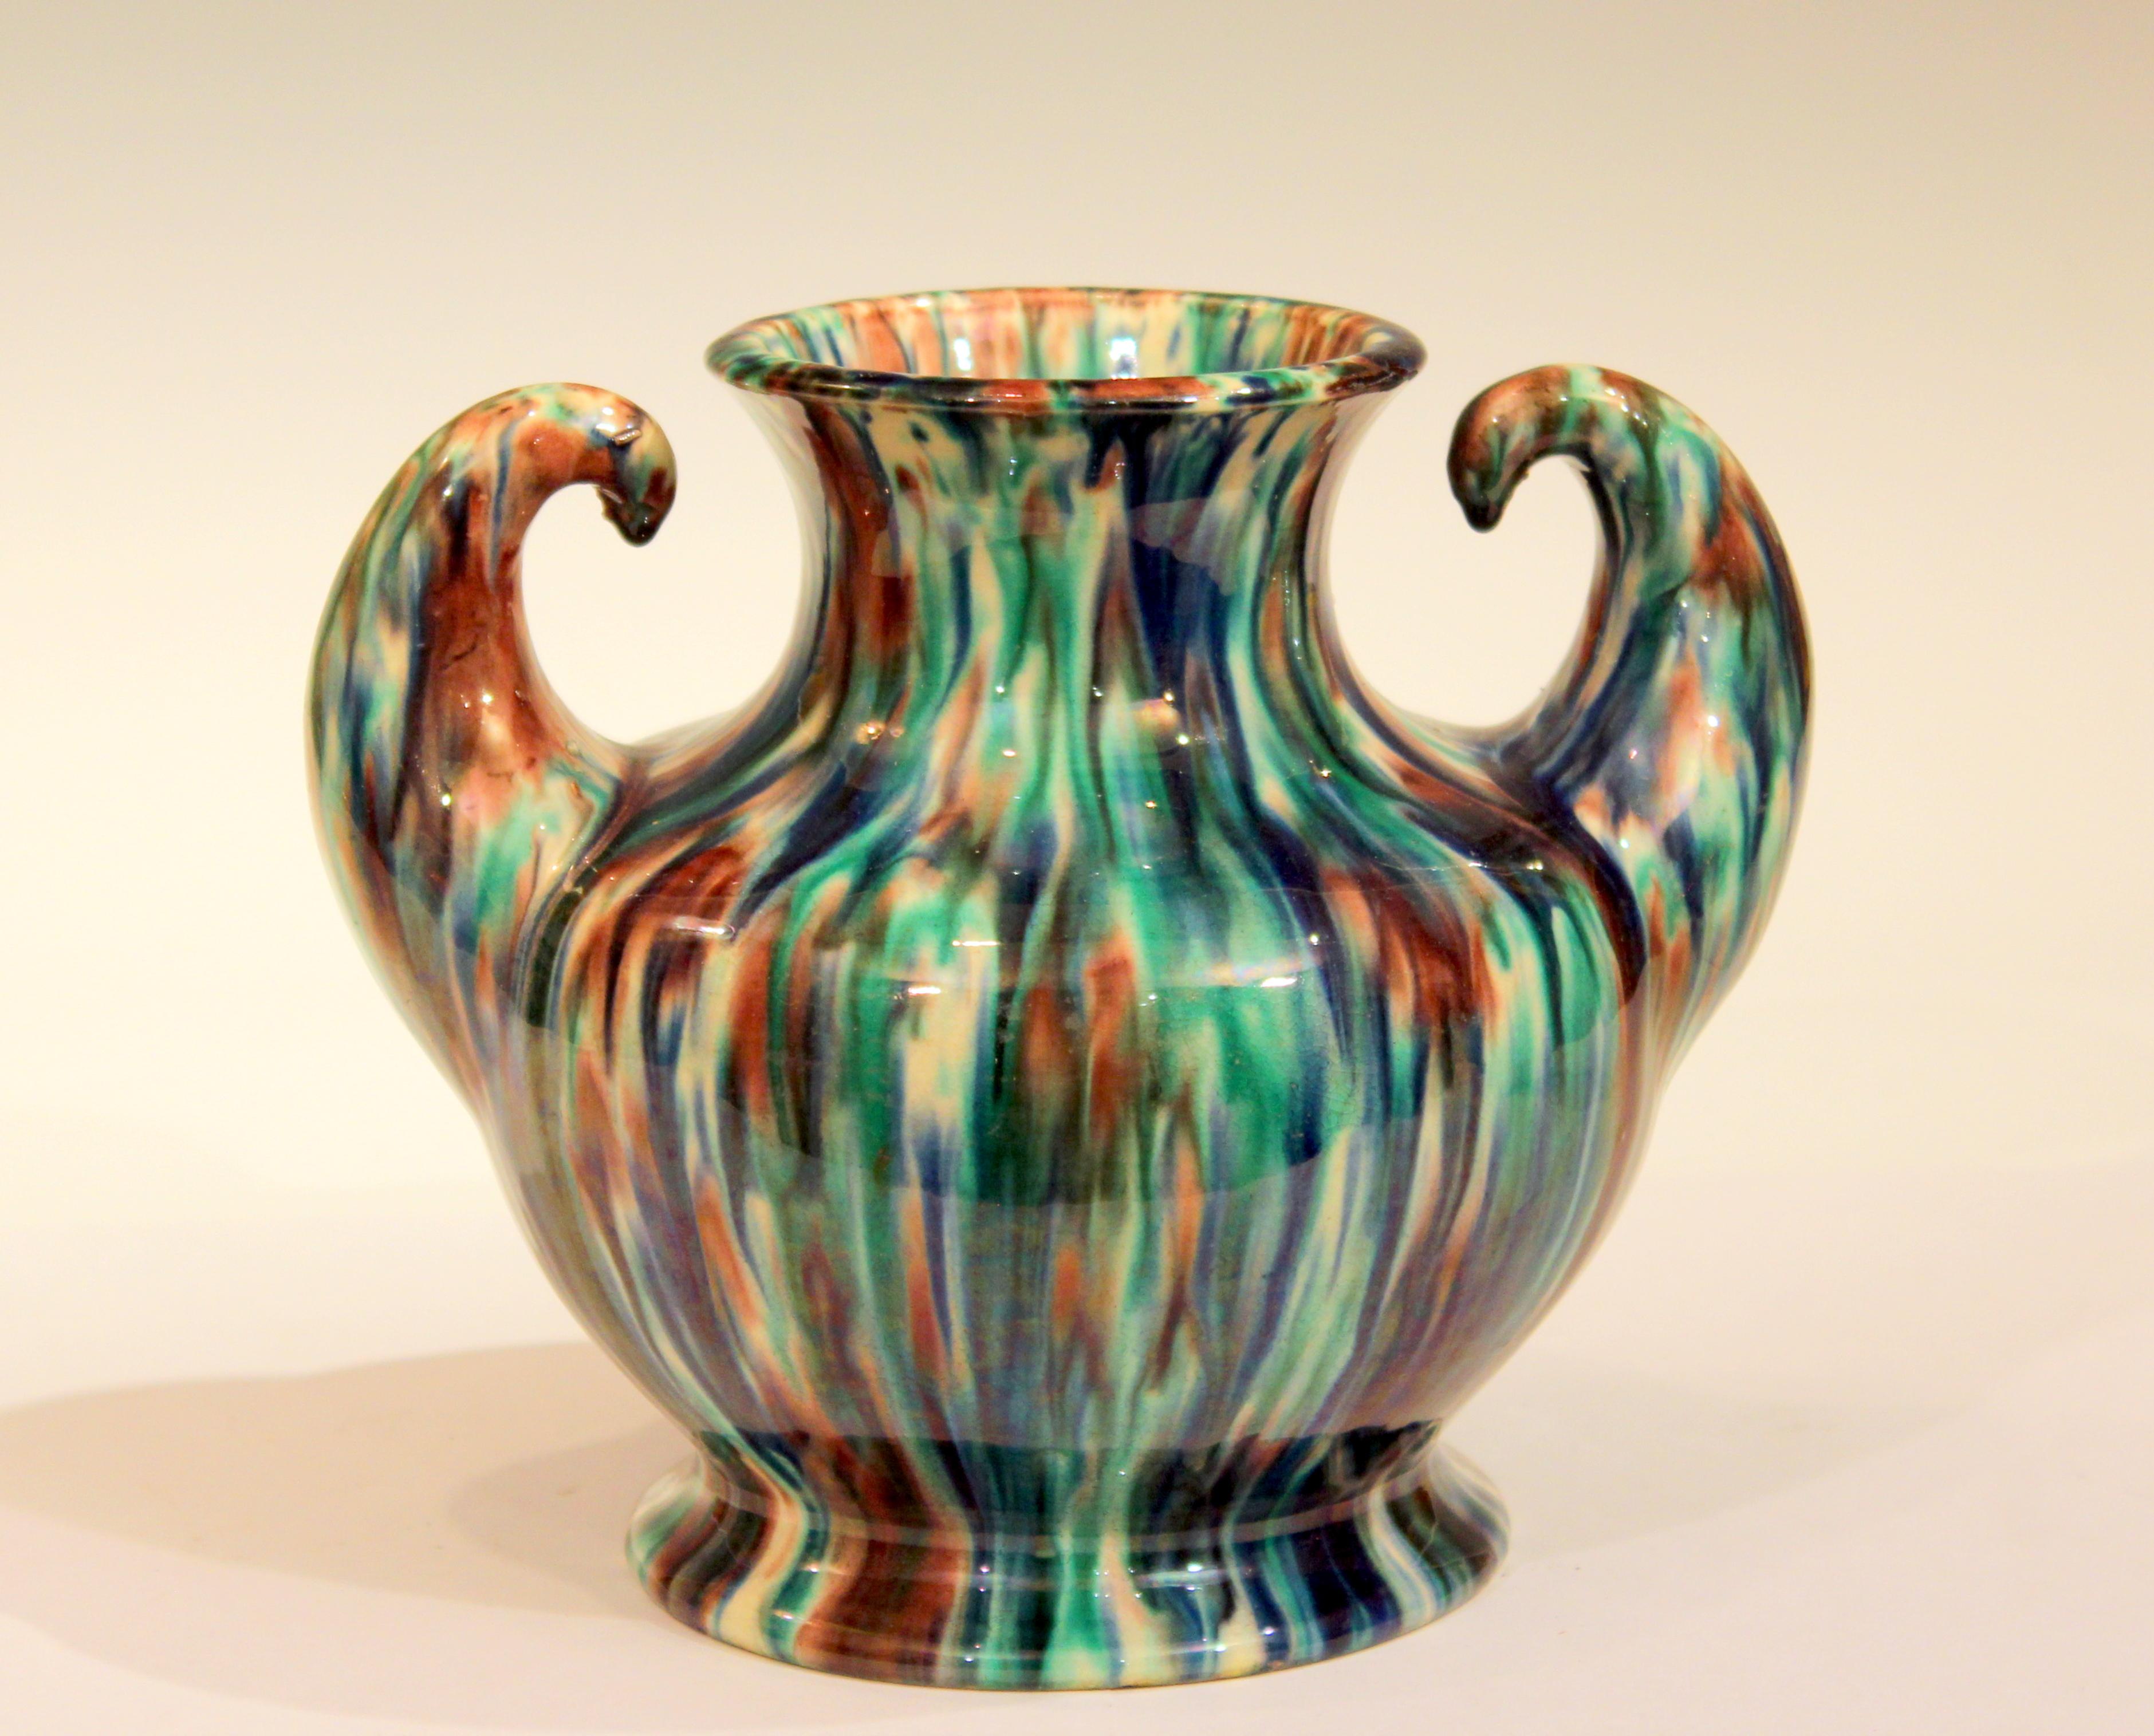 Awaji Pottery vase in Art Deco form with outstreched arms flexing and striking flambe glaze, circa 1930. Impressed marks. Measure: 6